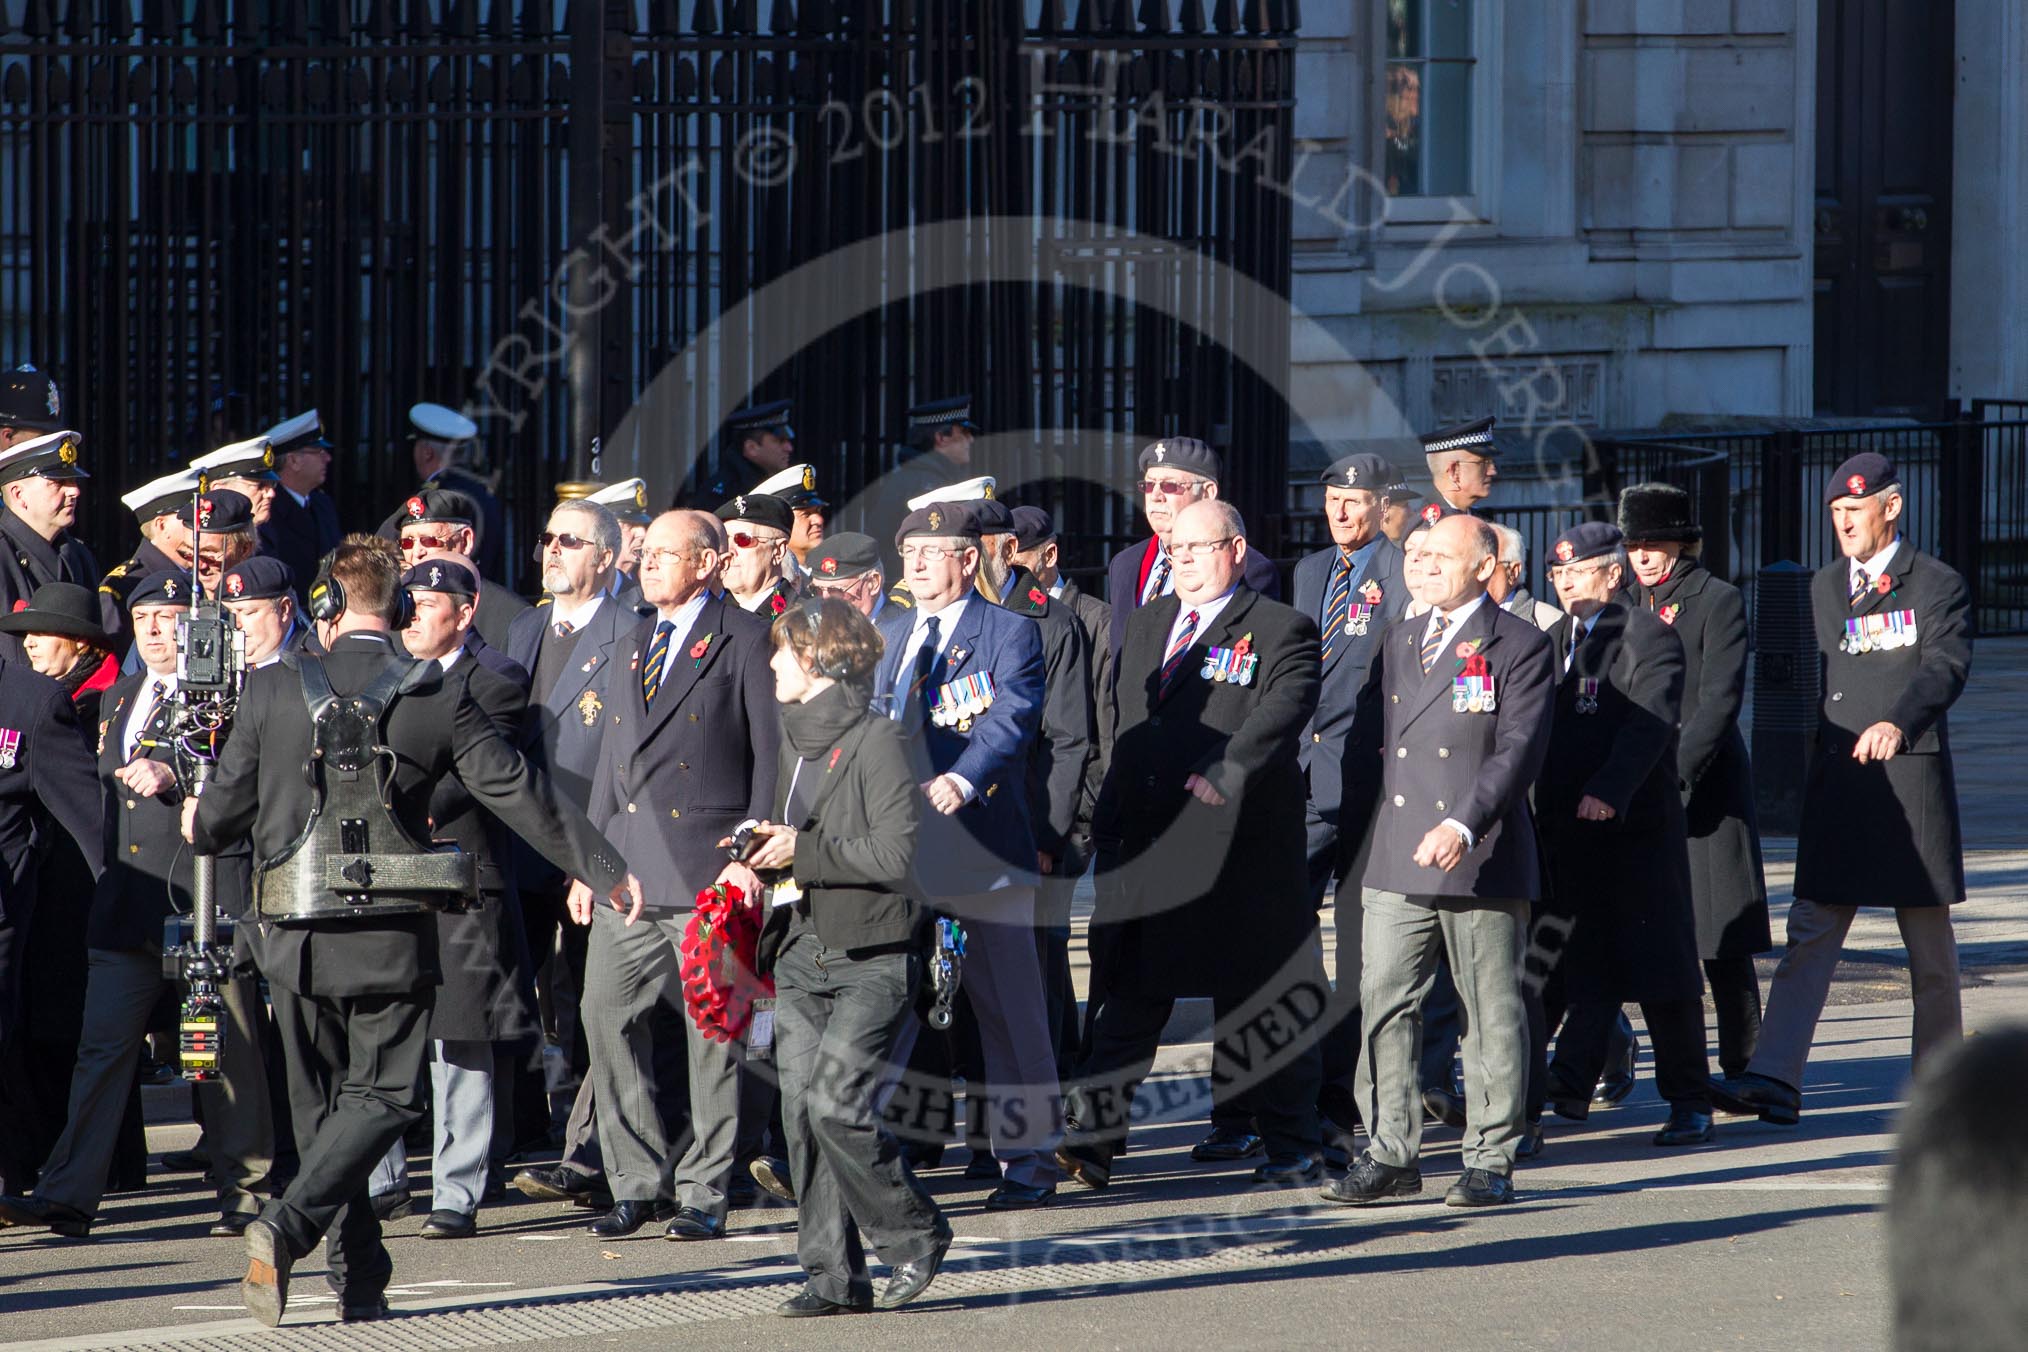 Remembrance Sunday 2012 Cenotaph March Past: Group B2, Royal Electrical & Mechanical Engineers Association..
Whitehall, Cenotaph,
London SW1,

United Kingdom,
on 11 November 2012 at 11:54, image #811